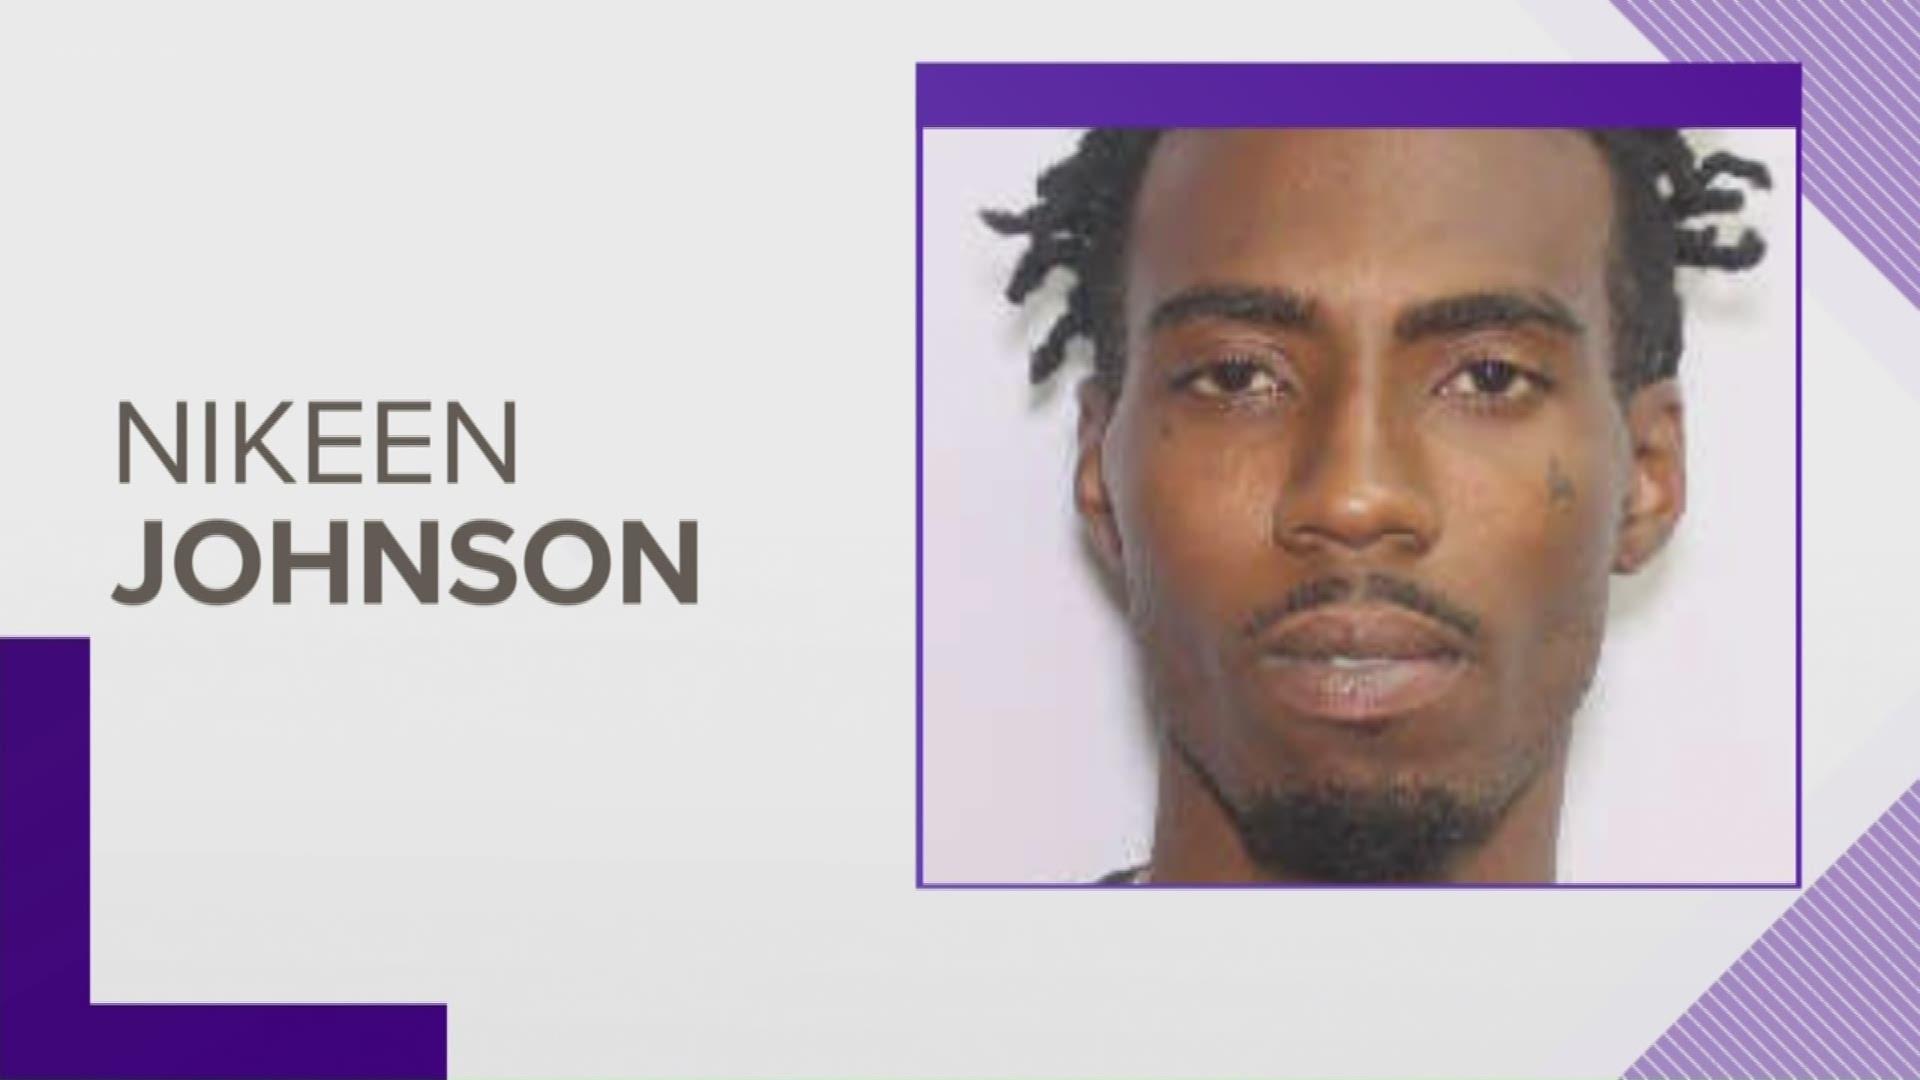 Nikeen Johnson, the man who Sumter deputies say shot a 7-year-old girl and wounded two other people, was arrested in New York City.